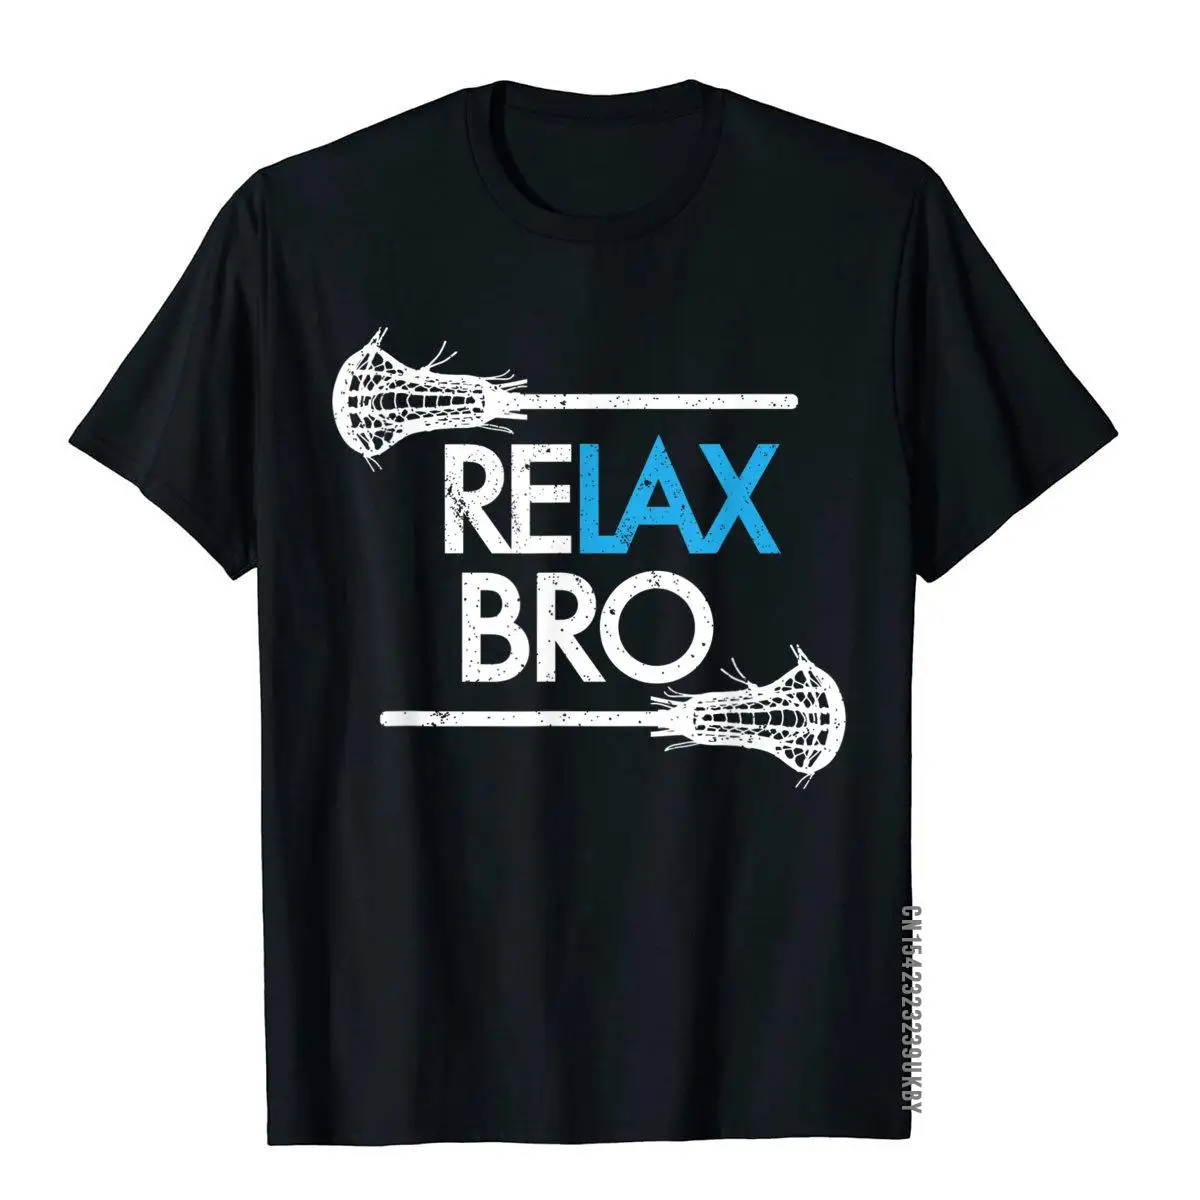 

RELAX Bro Lacrosse T Shirt Funny LaX Team Lacrosse T-Shirt Cotton T Shirt For Boys Fitness Tees Discount Leisure